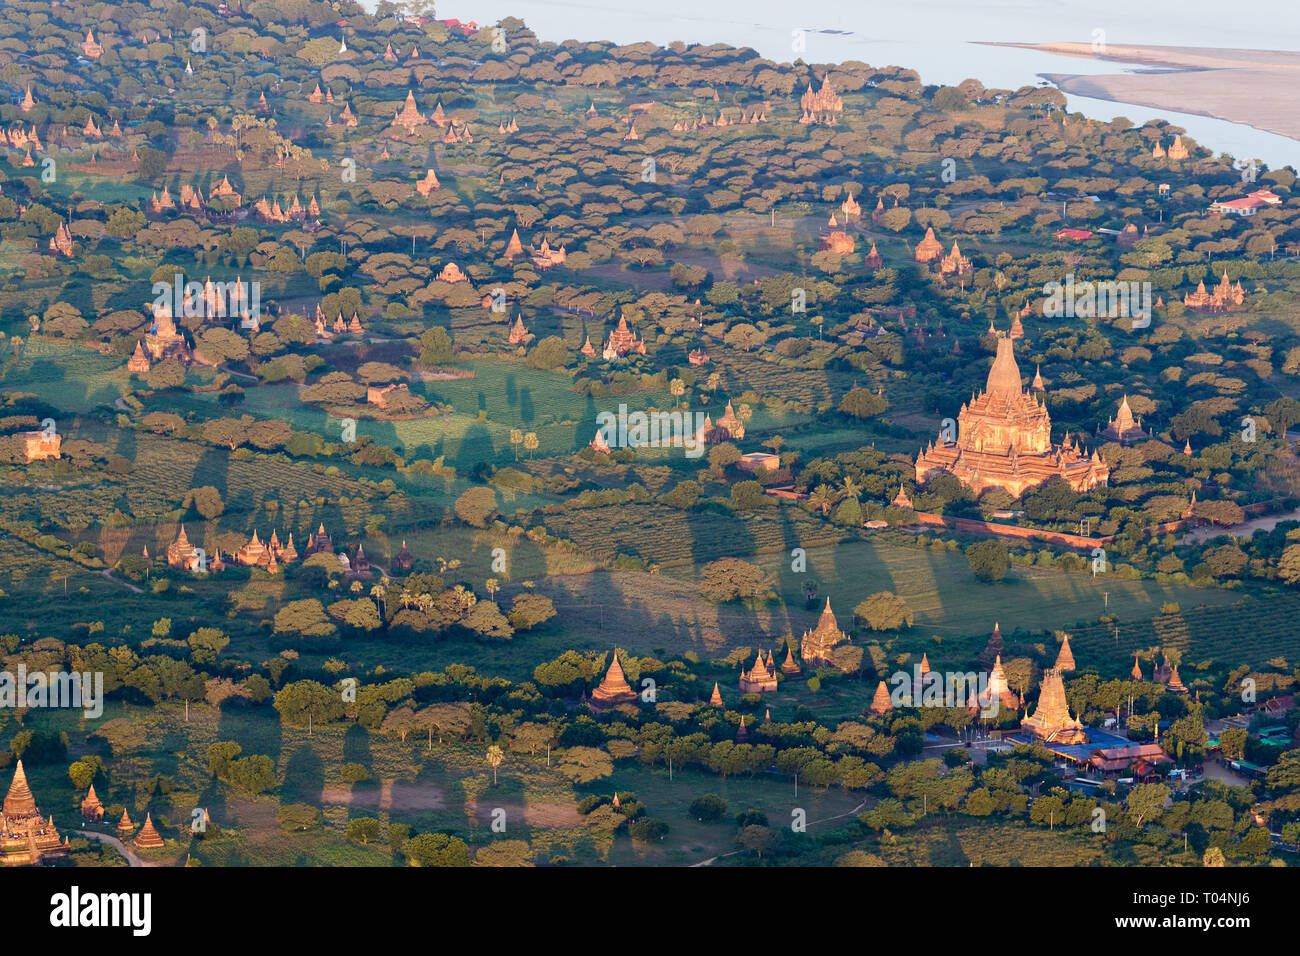 Aerial view of temples and historical pagodas of the Archaeological Zone in Bagan in the early morning sunlight. Myanmar (Burma). Stock Photo